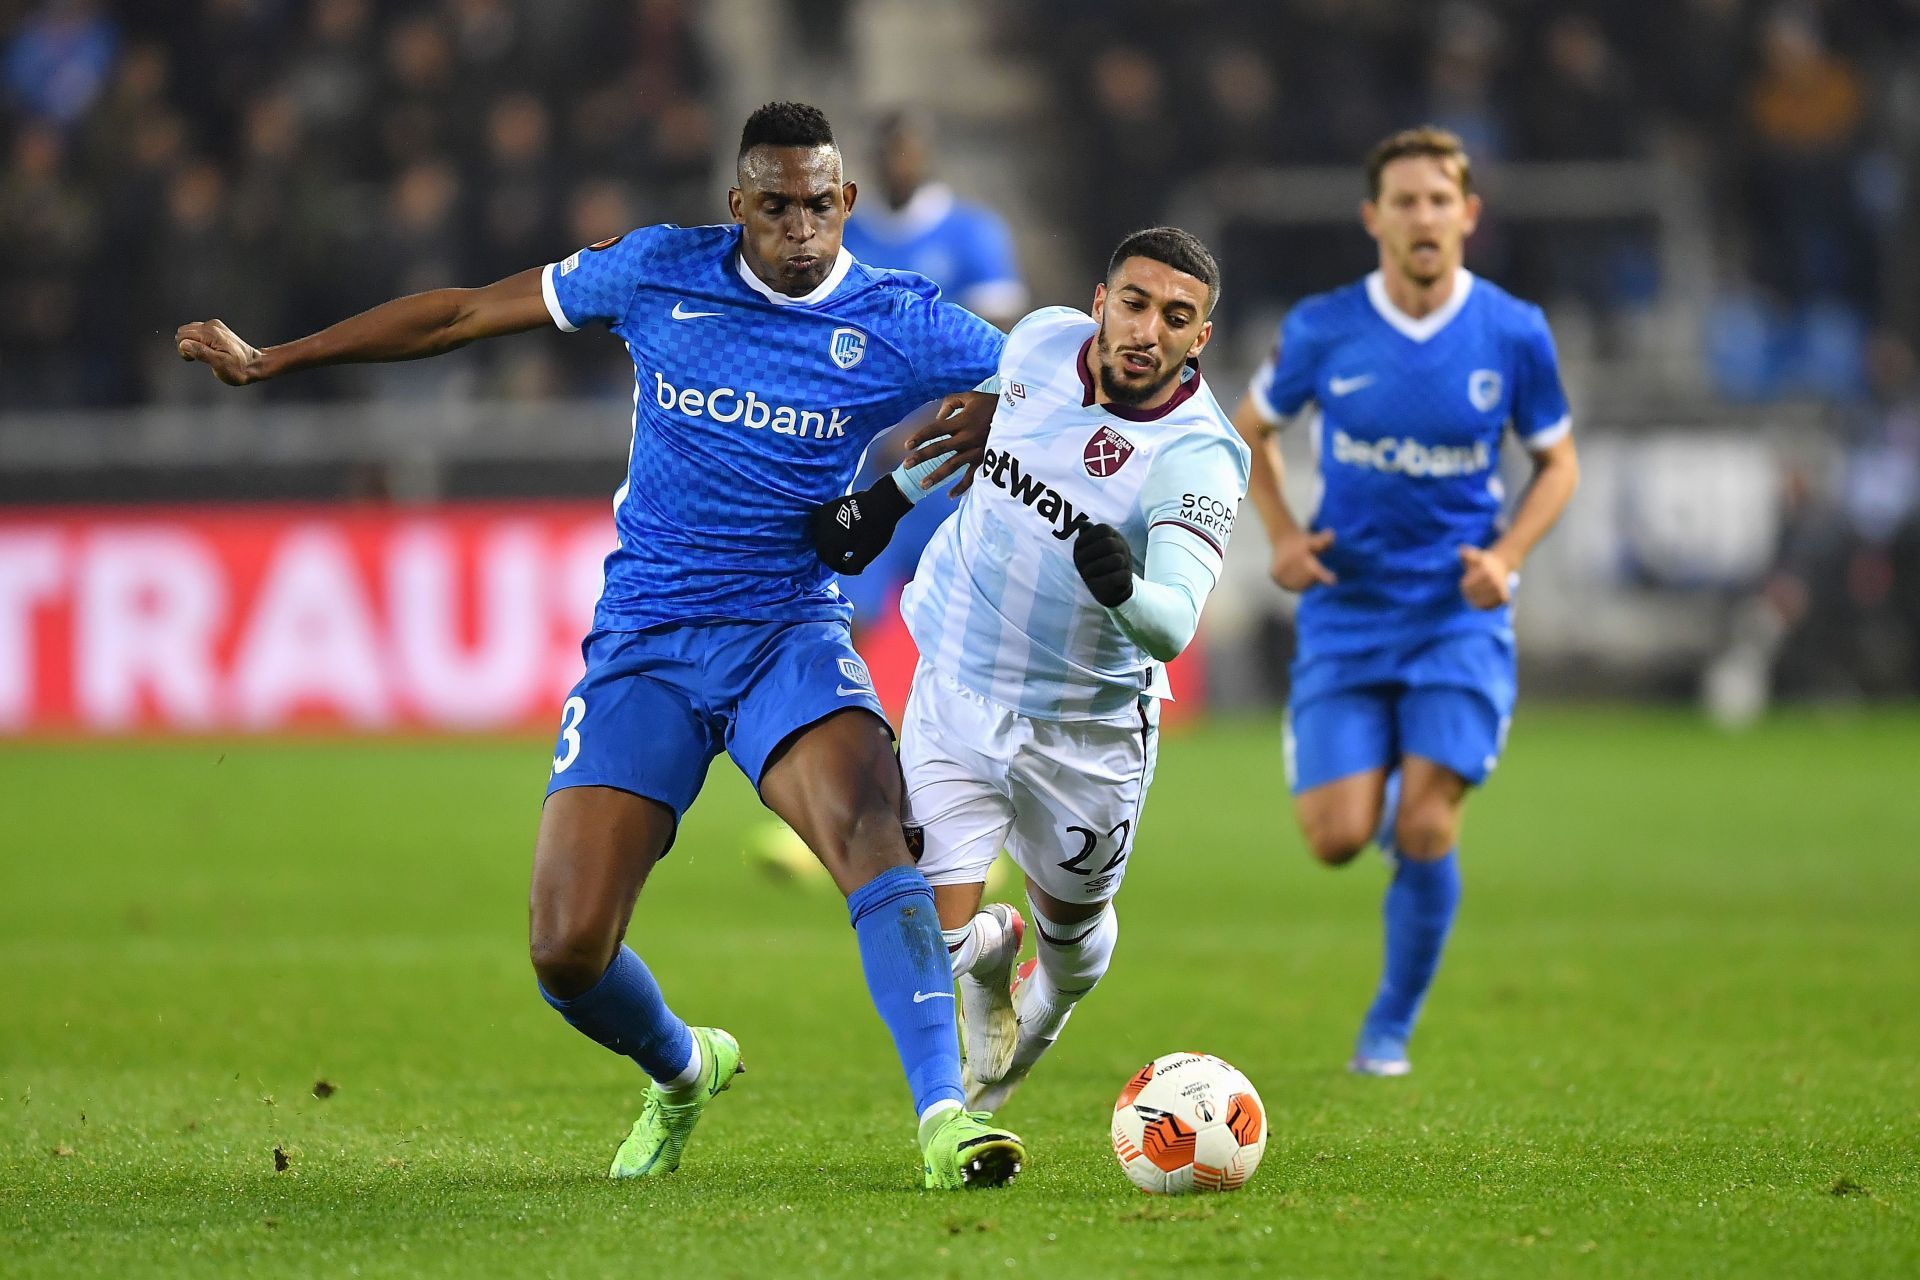 KRC Genk play host to Cercle Brugge on Saturday